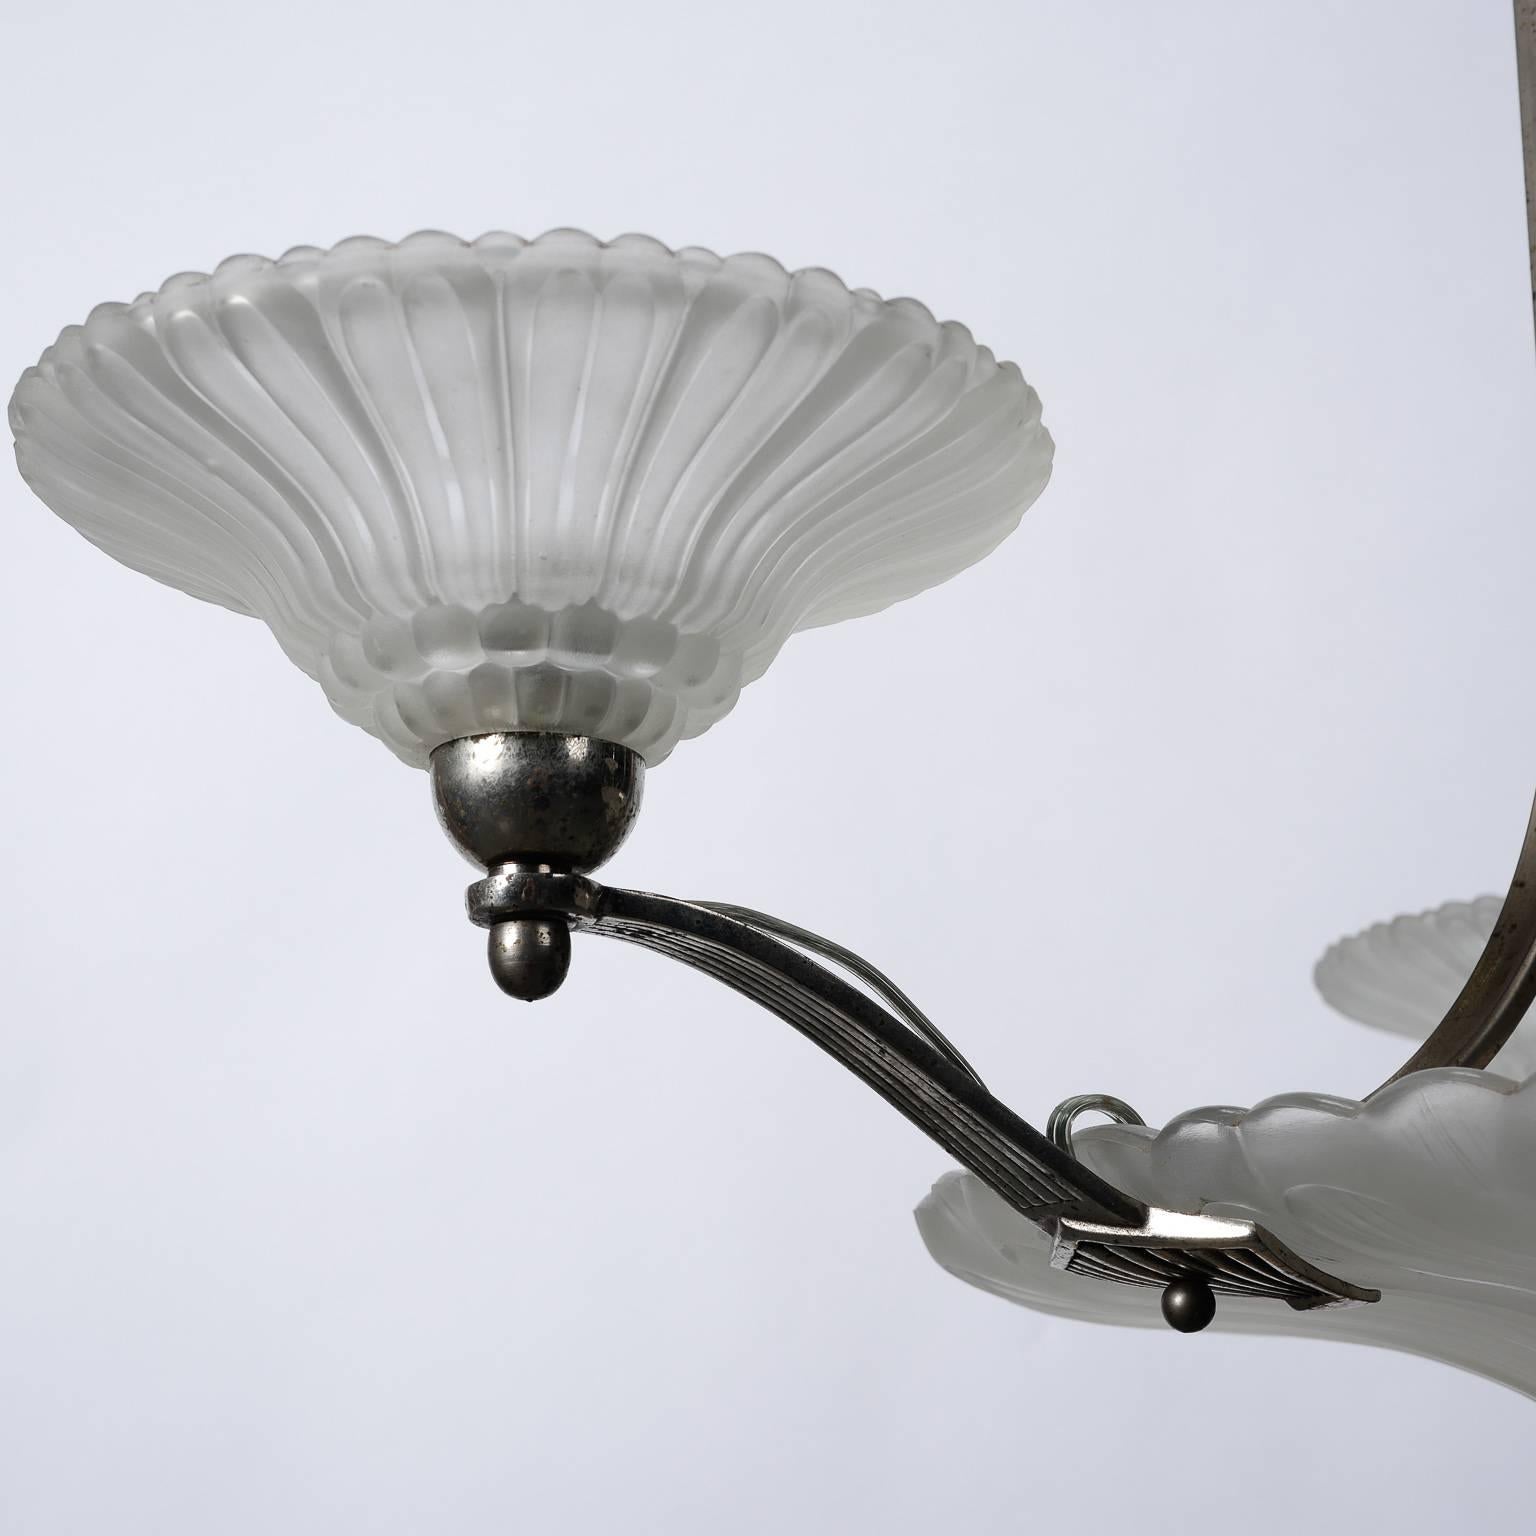 Art Deco chandelier found in Brussels and probably is French in origin, circa 1930s. Center globe is molded satin glass with silver tone metal arms that support three smaller globes. All have been rewired to comply with US electrical standards. All